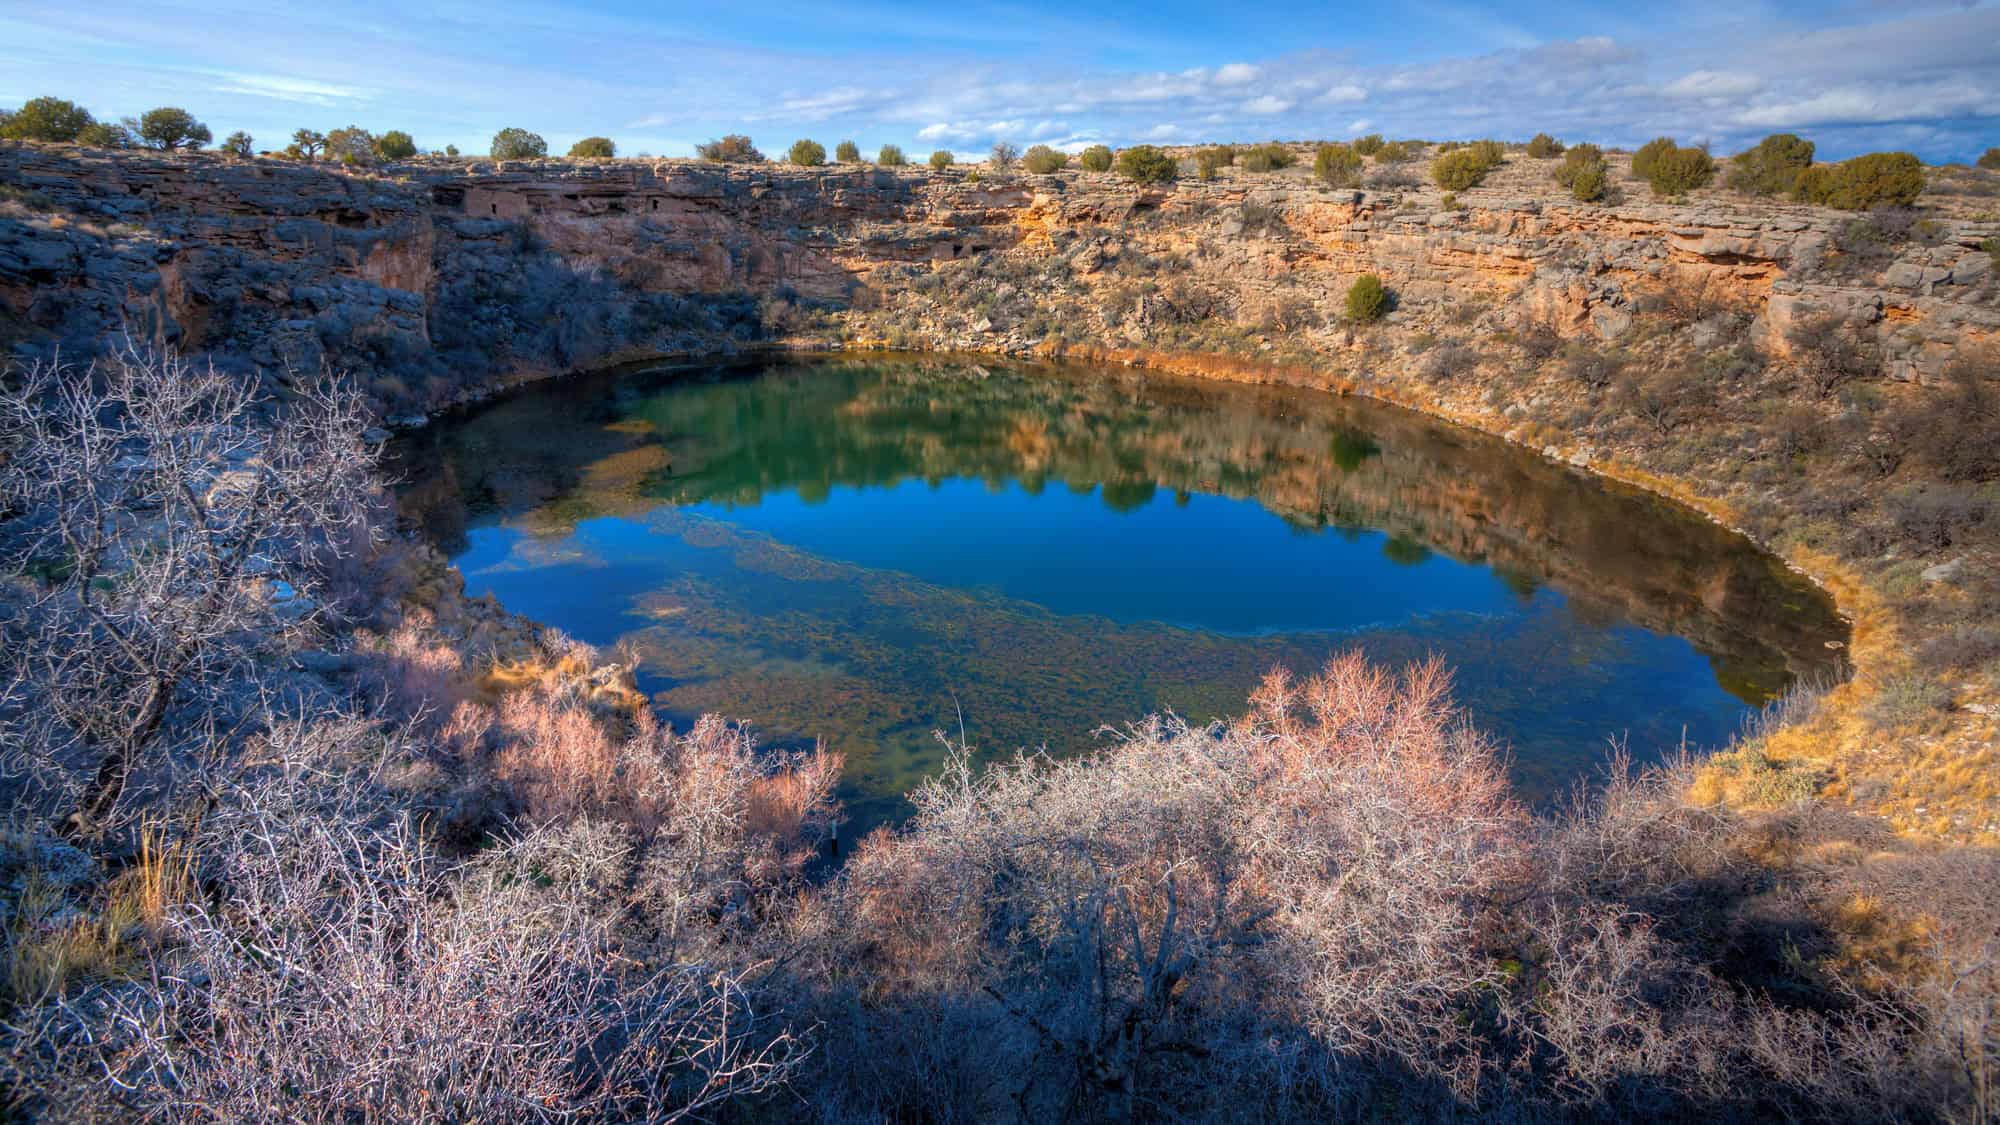 <p>Montezuma Well might look like an oasis, but it’s actually a watery tomb. The well’s tranquillity is disrupted by <strong>high levels of arsenic in the water</strong>, a lovely gift from the surrounding limestone. So swimming here is like signing up for a toxic bath. </p> <p>The steep, slippery banks also make escaping the water a feat for mountain goats. And hidden underwater caves and sudden drop-offs can disorient even the most seasoned daredevils. Oh, and let’s not forget the leeches—nature’s little party favors just waiting to latch onto unsuspecting swimmers. This is one “well” you don’t want to wish upon.</p>